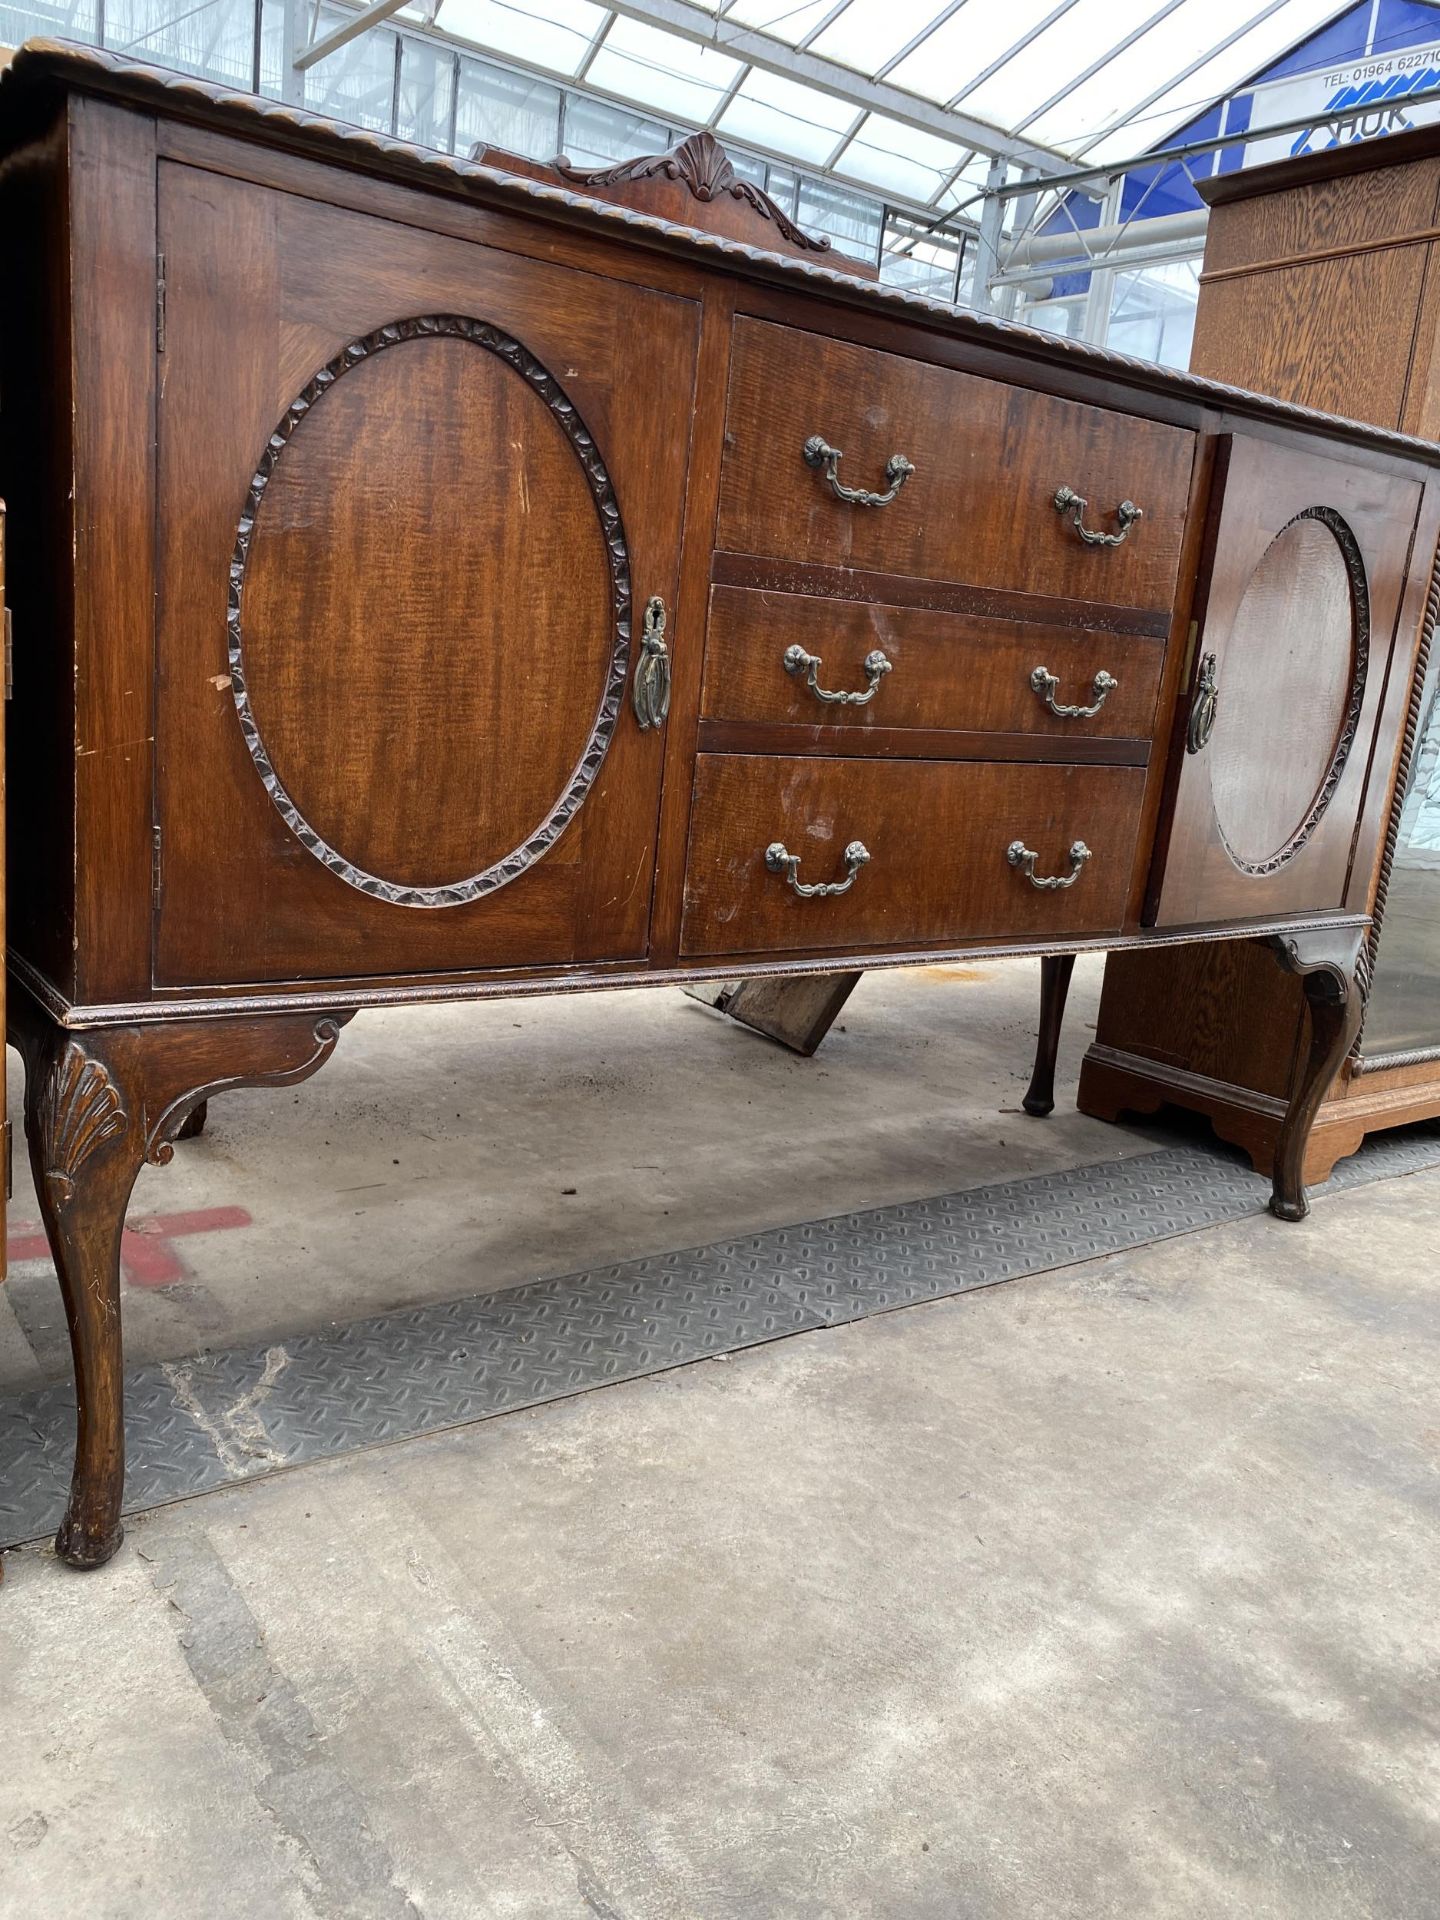 AN EARLY 20TH CENTURY MAHOGANY SIDEBOARD WITH ROPE EDGE ON CABRIOLE LEGS, 60" WIDE - Image 3 of 4